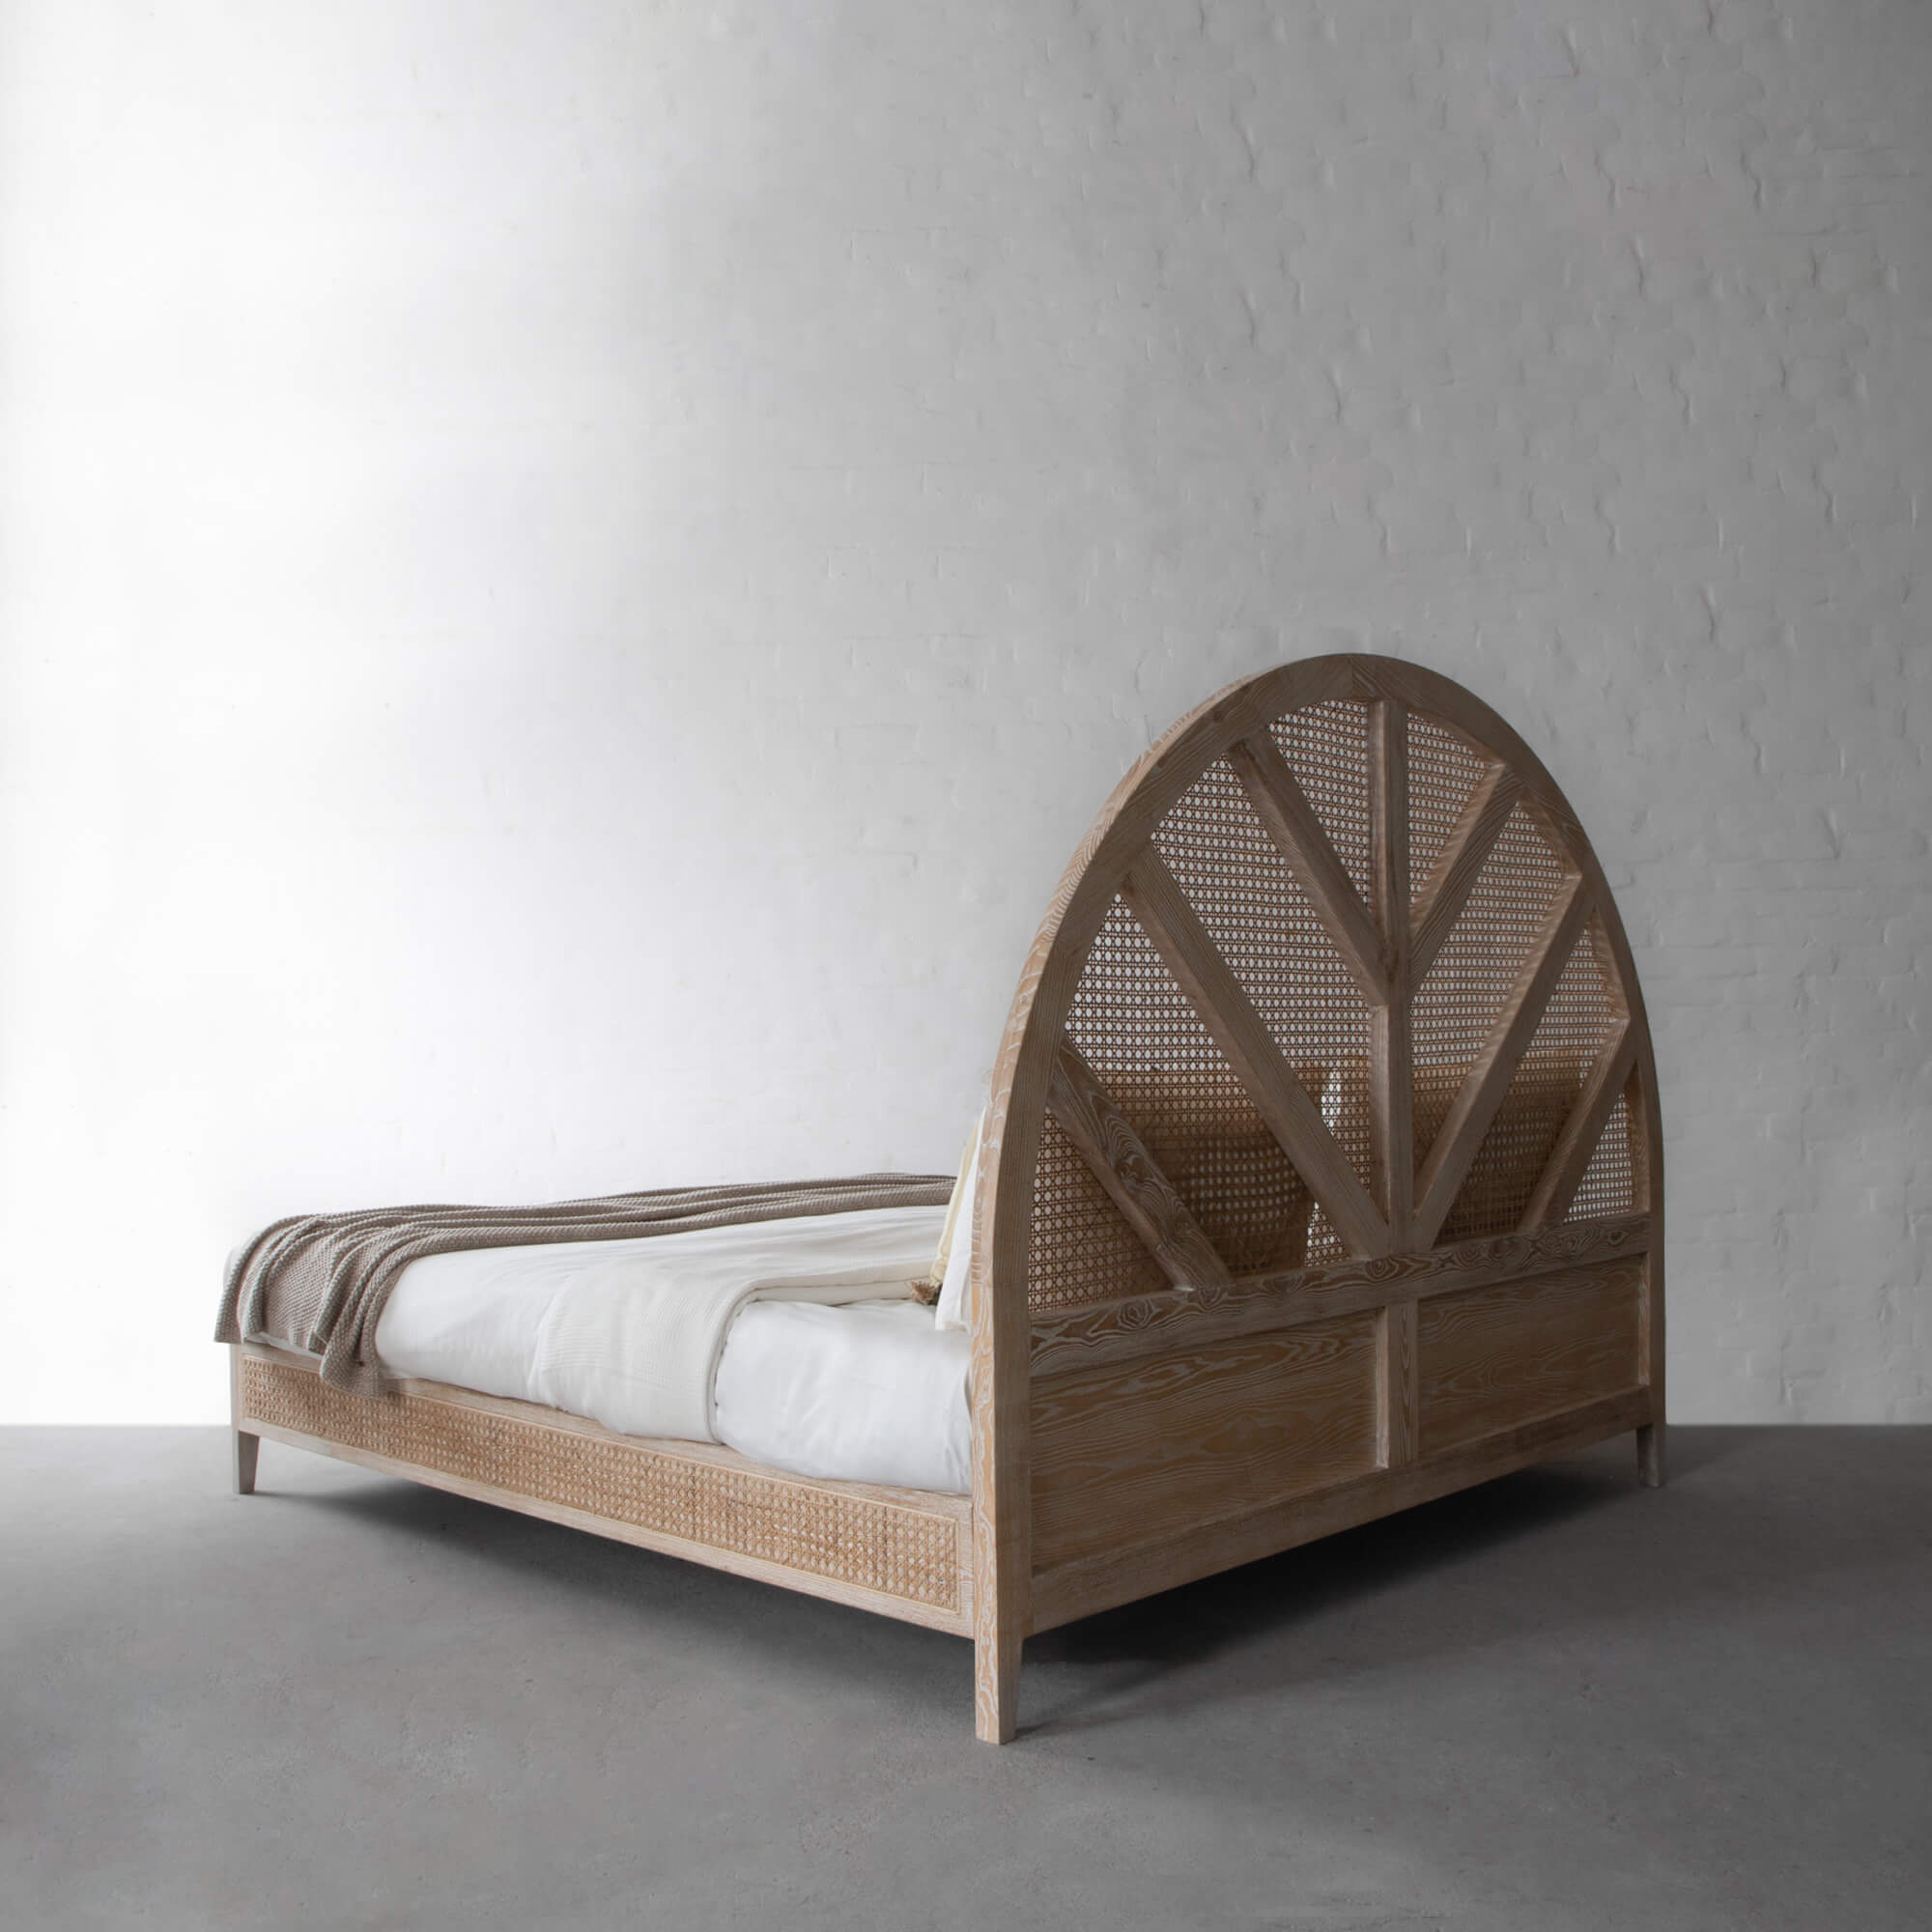 PROVINCE RATTAN BED